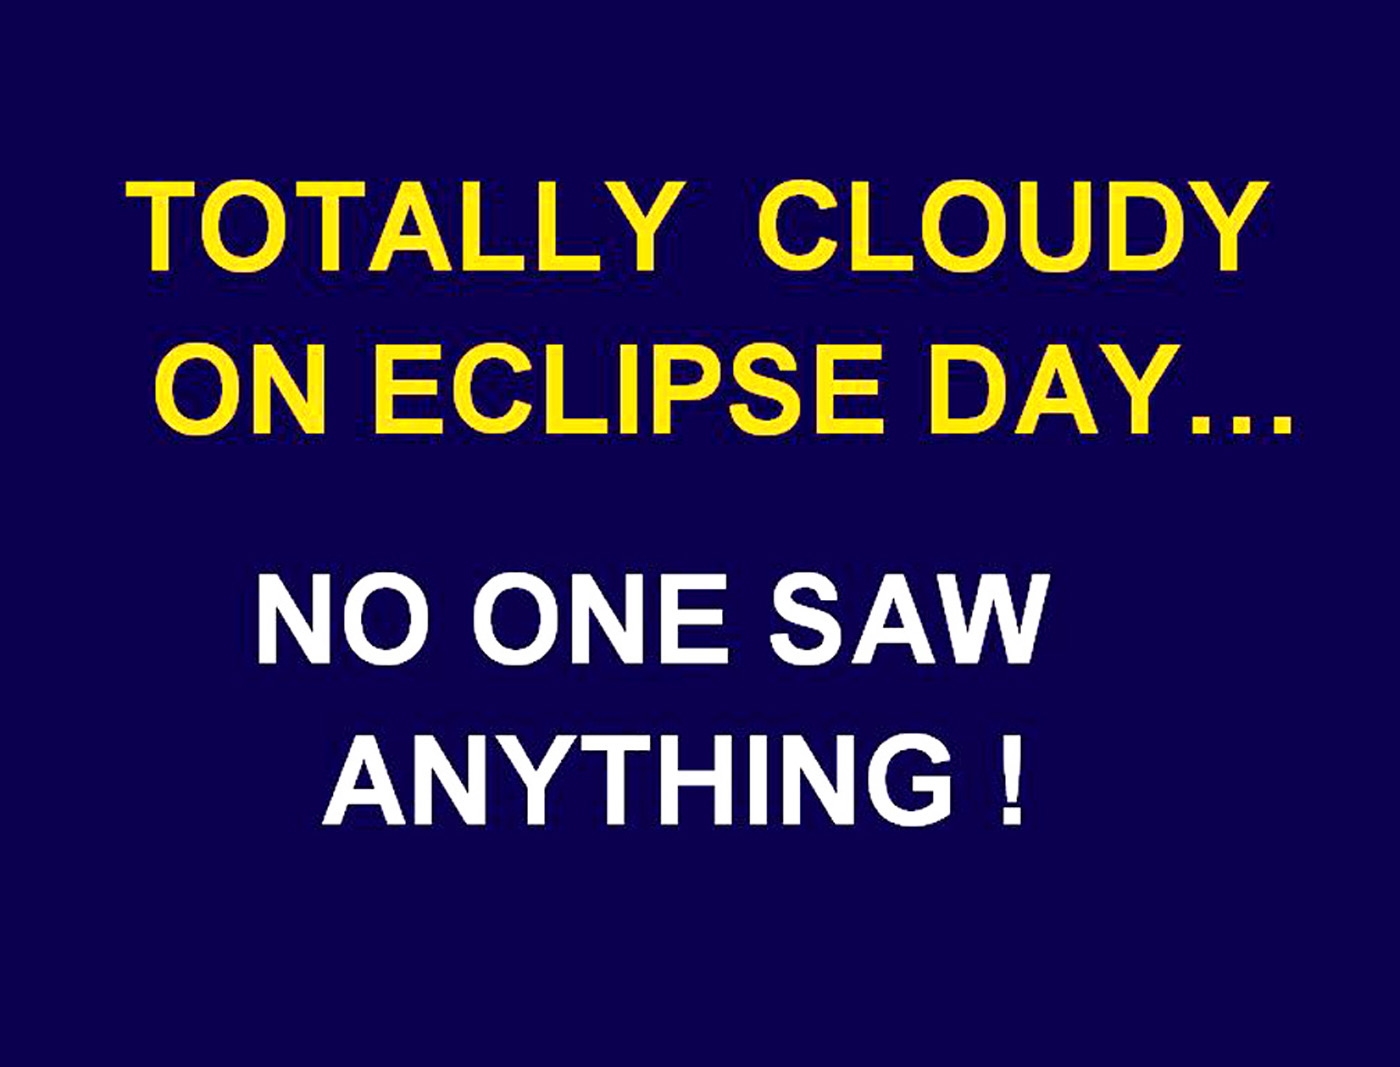 Eclipse 2002 - A42 - Title - Totally Cloudy